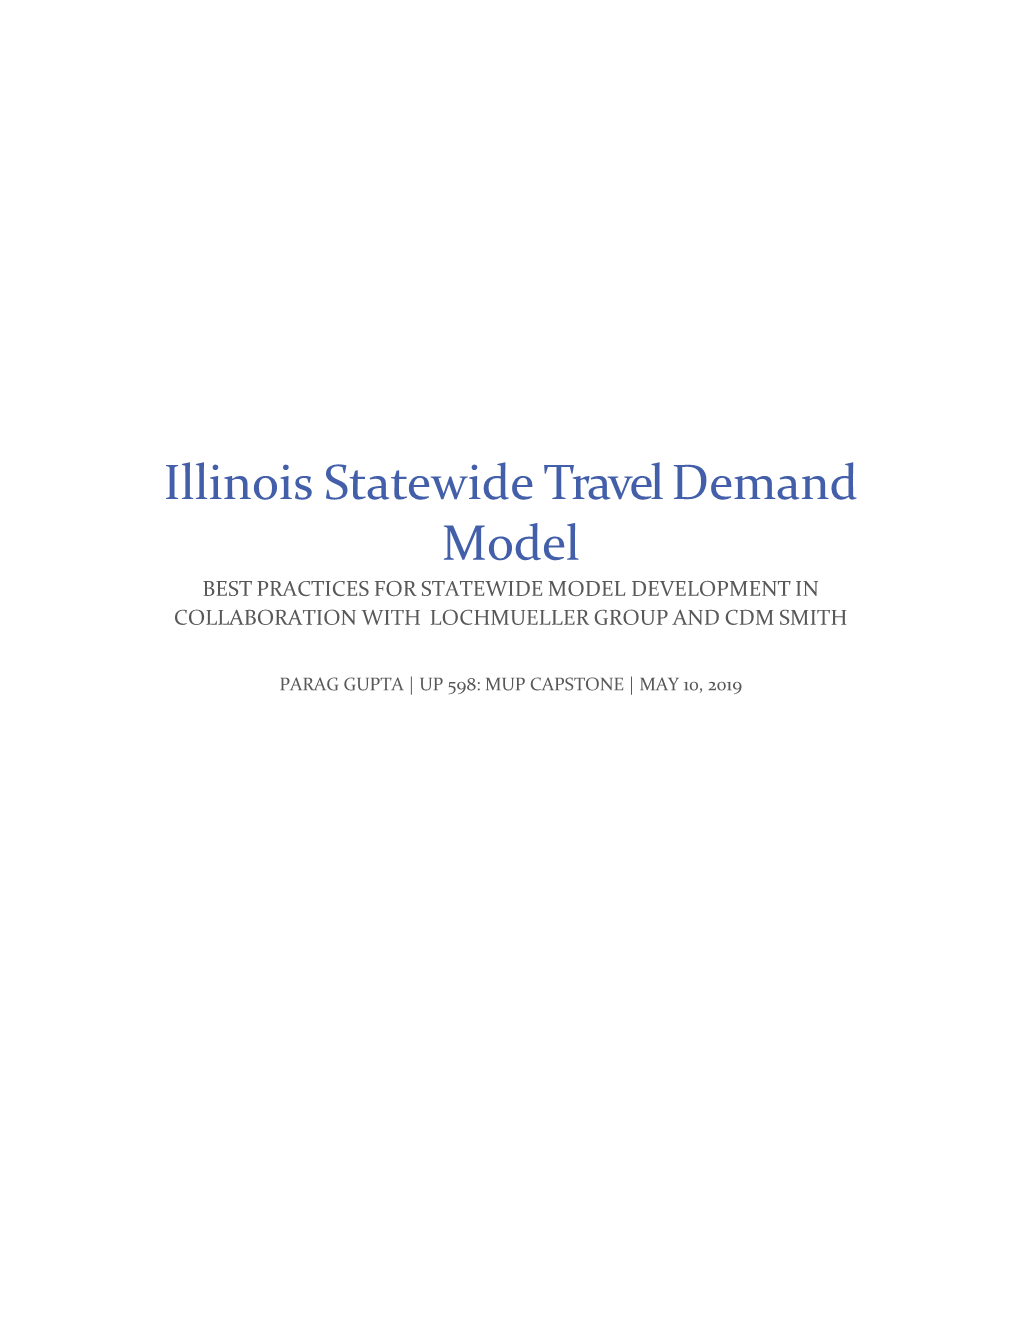 Illinois Statewide Travel Demand Model BEST PRACTICES for STATEWIDE MODEL DEVELOPMENT in COLLABORATION with LOCHMUELLER GROUP and CDM SMITH